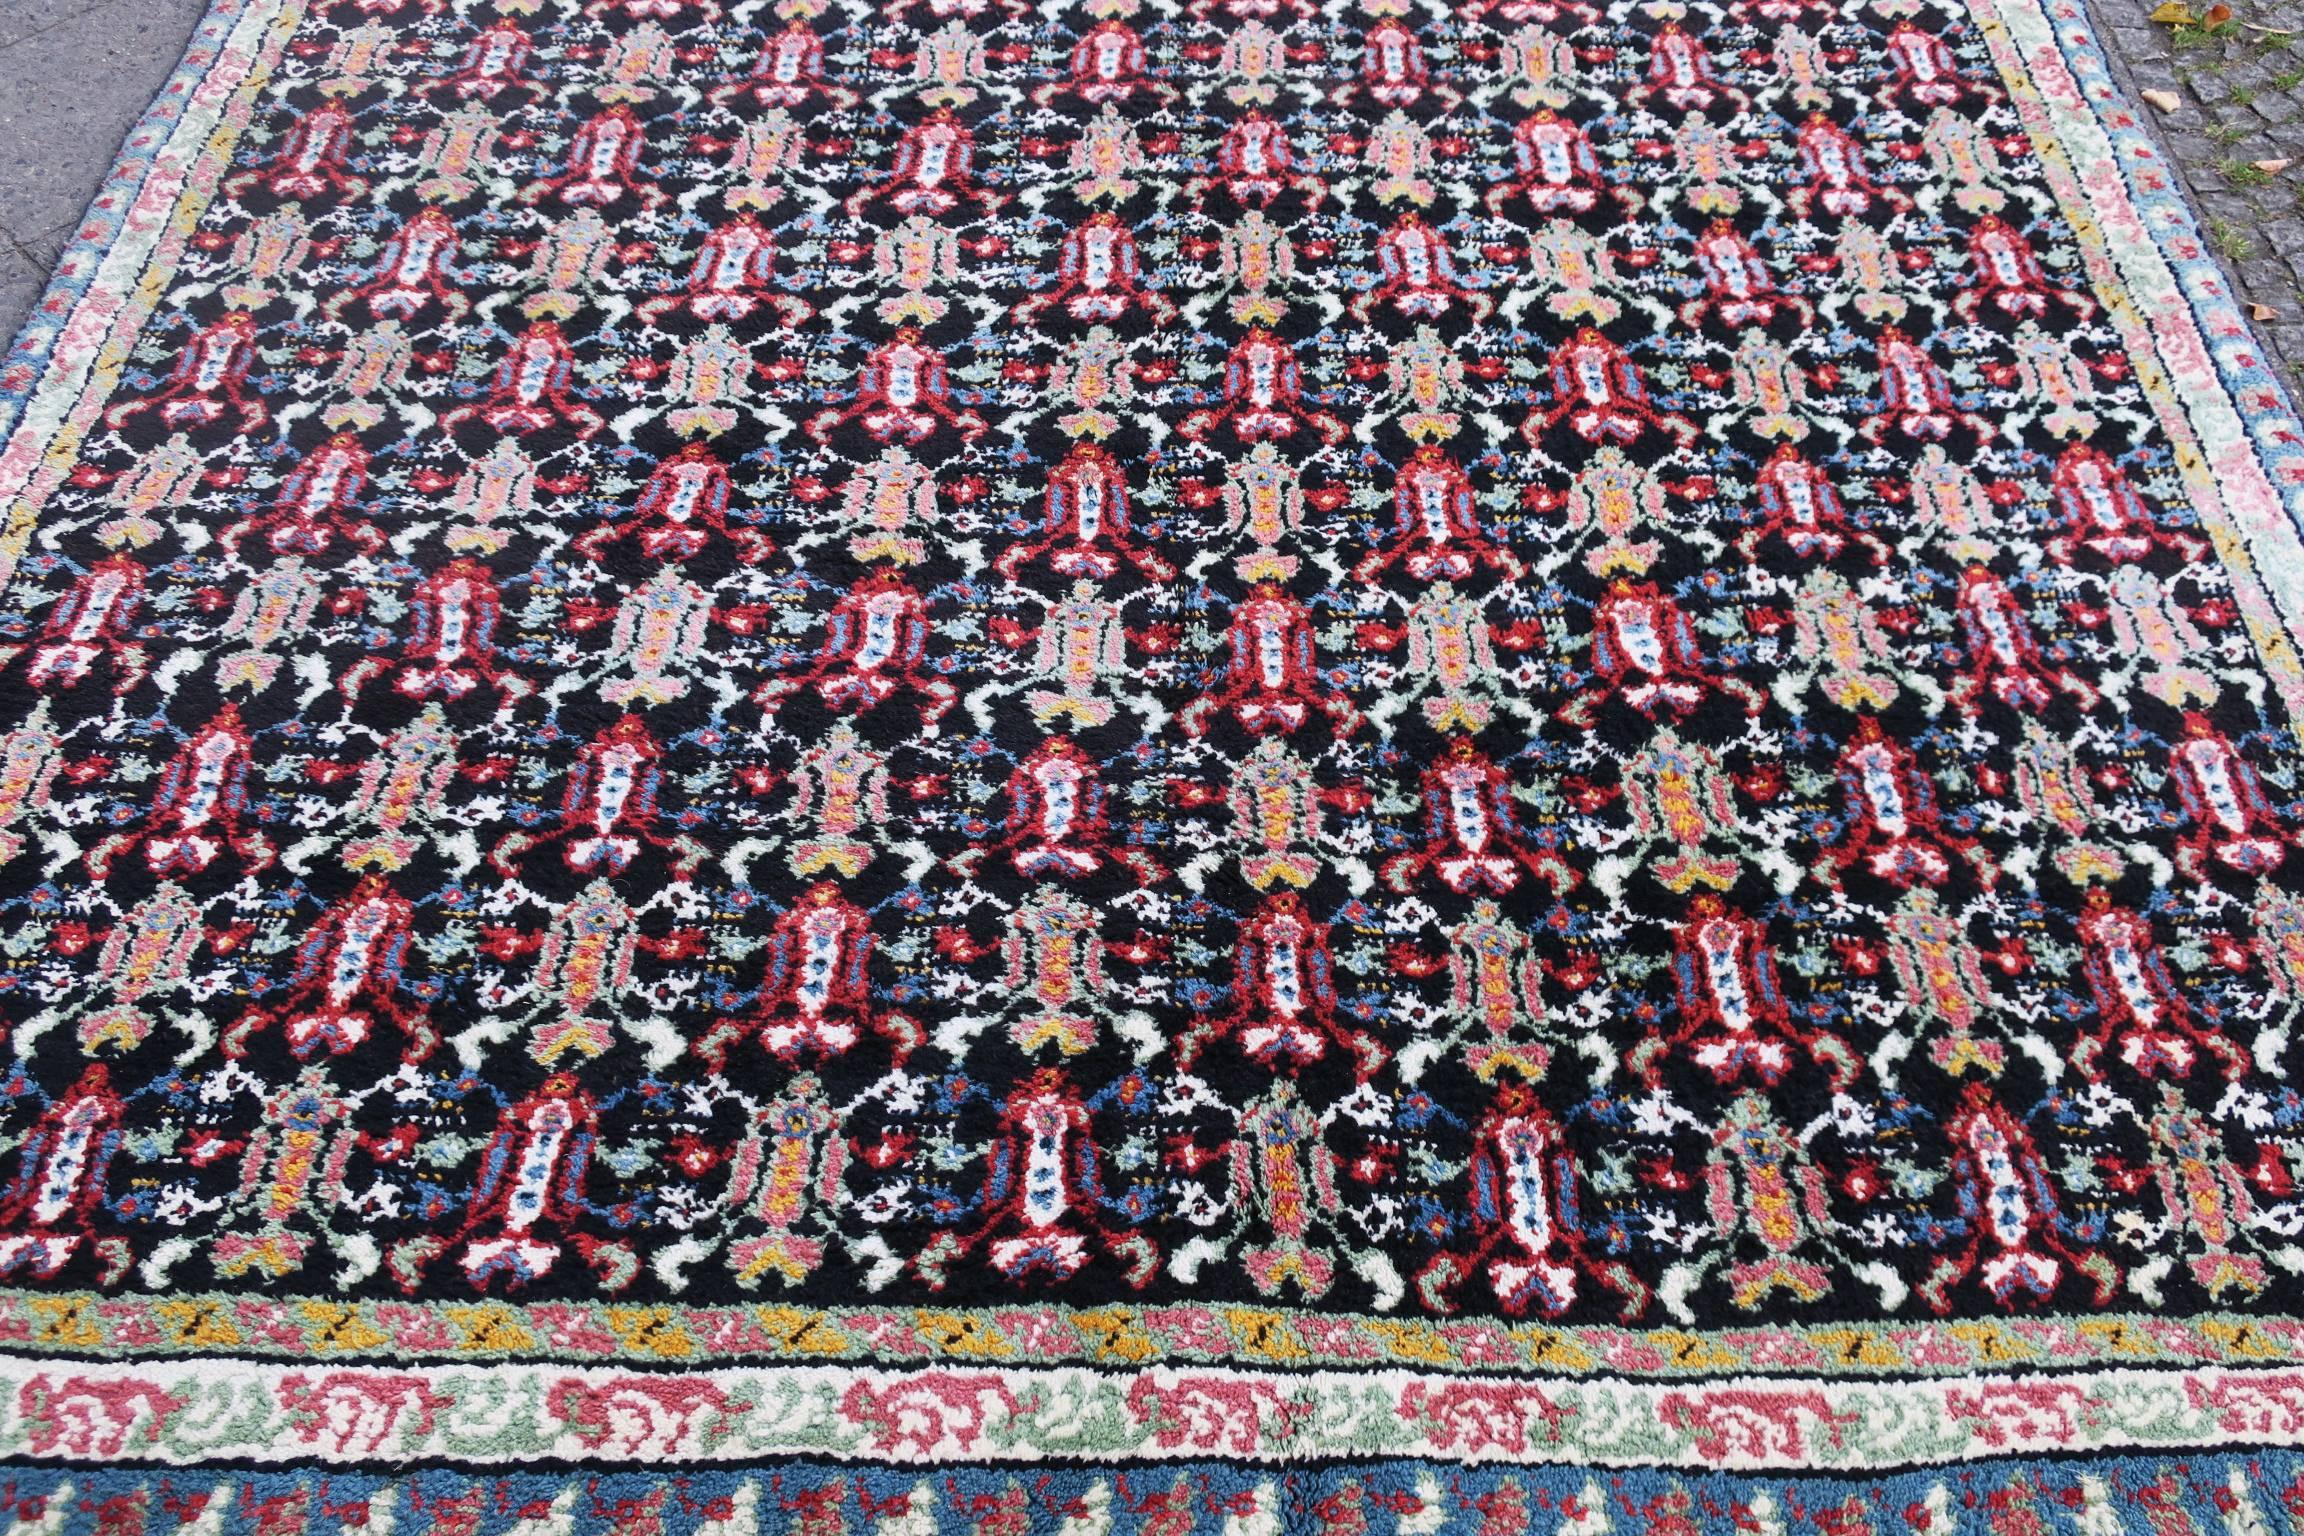 Tunisian carpet in very good condition with full pile.

Striking and decorative rug with a multicolored lattice pattern, soft colors on a black background.

North Africa, probably Tunisia.

Good decorators' piece, its stylized nearly abstract